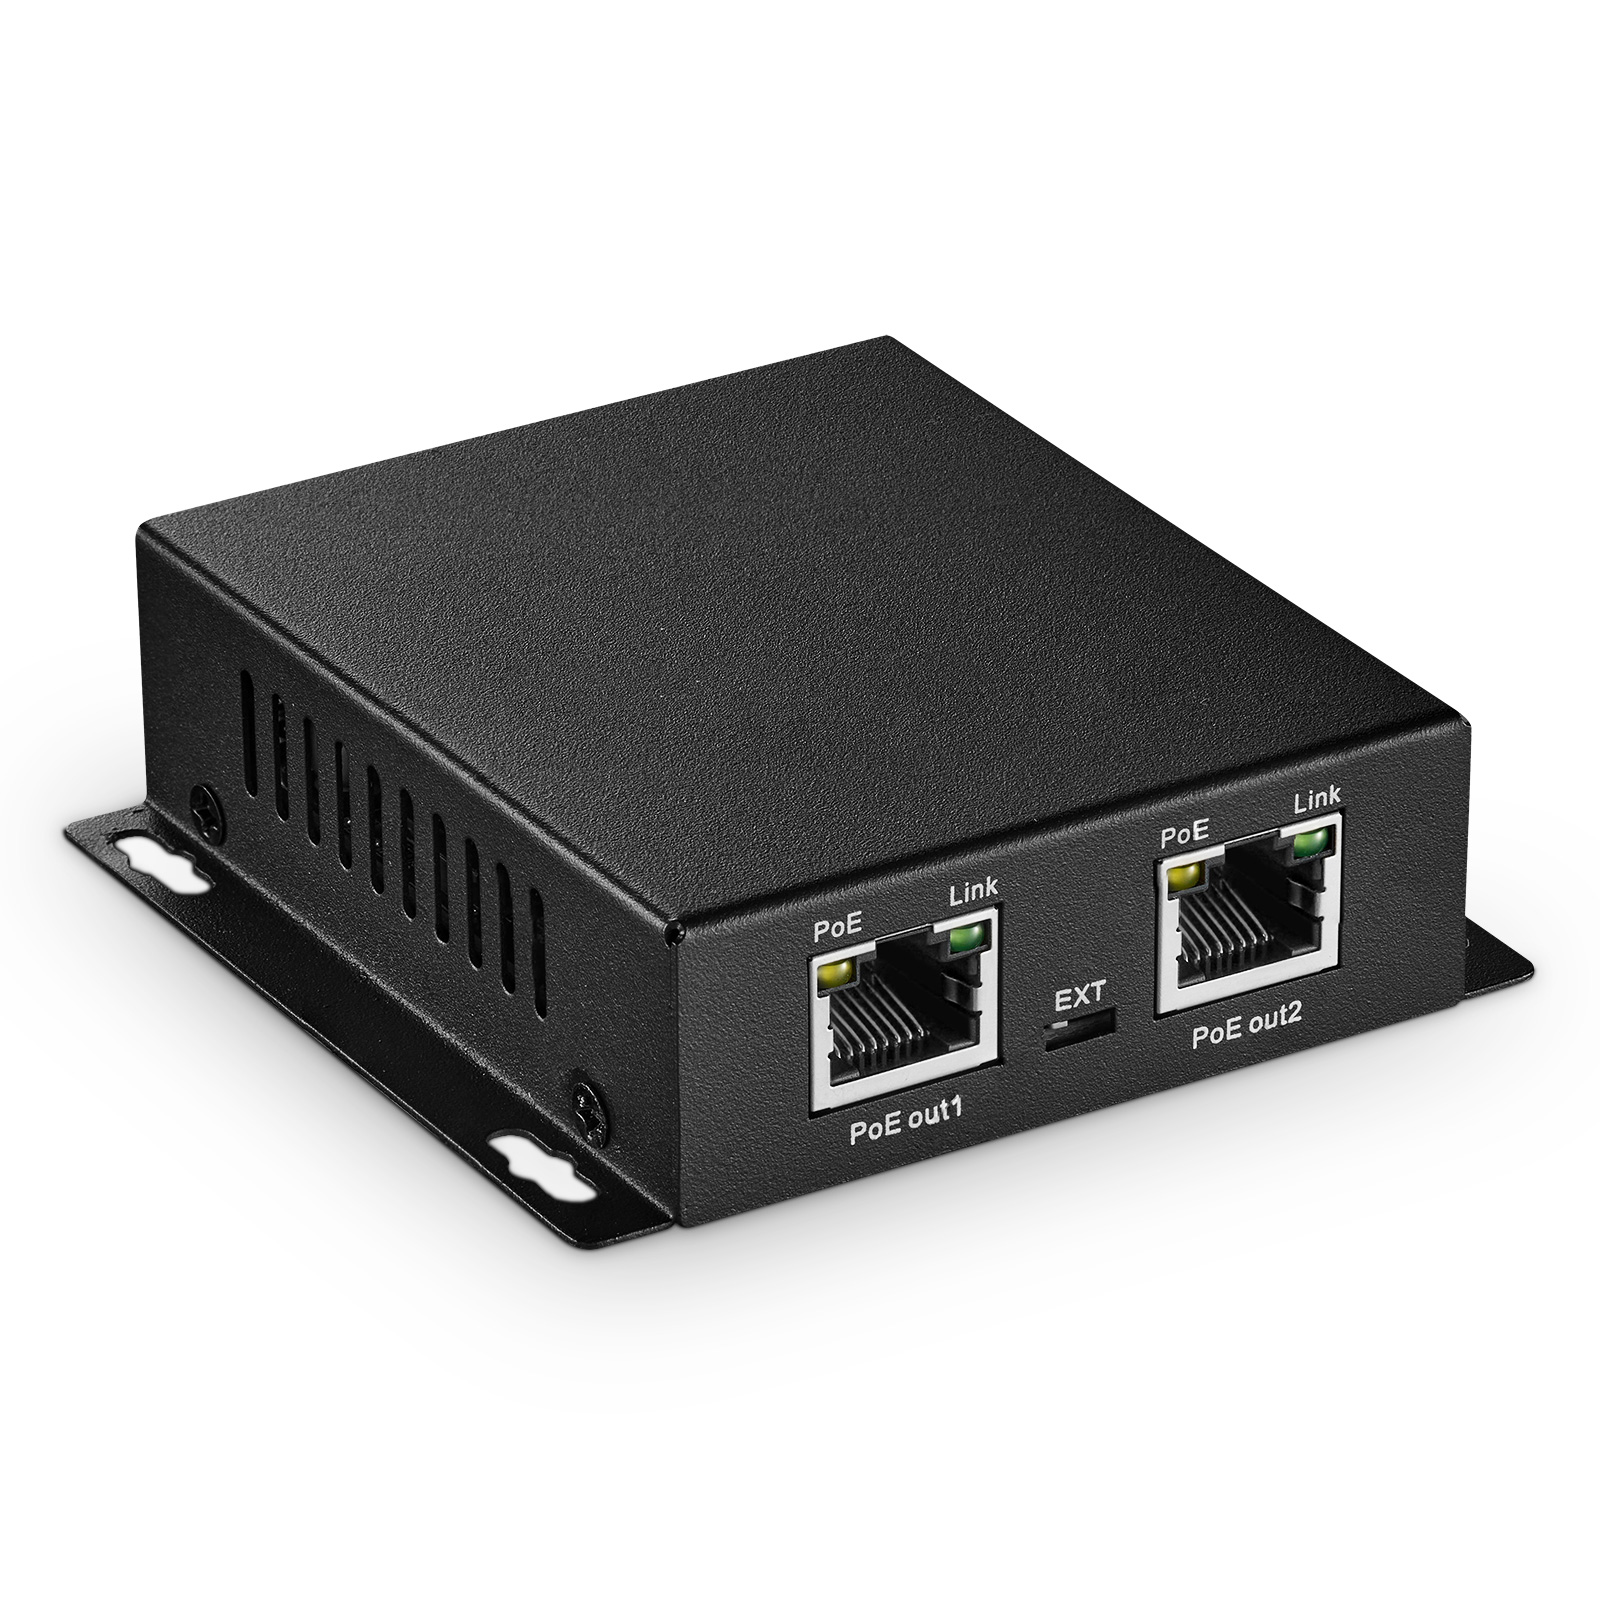 MokerLink 3 Ports Gigabit PoE Passthrough Switch, IEEE 802.3af/at PoE  Repeater, 100/1000Mbps, 1 PoE in 2 PoE Out, Wall Mount, PoE